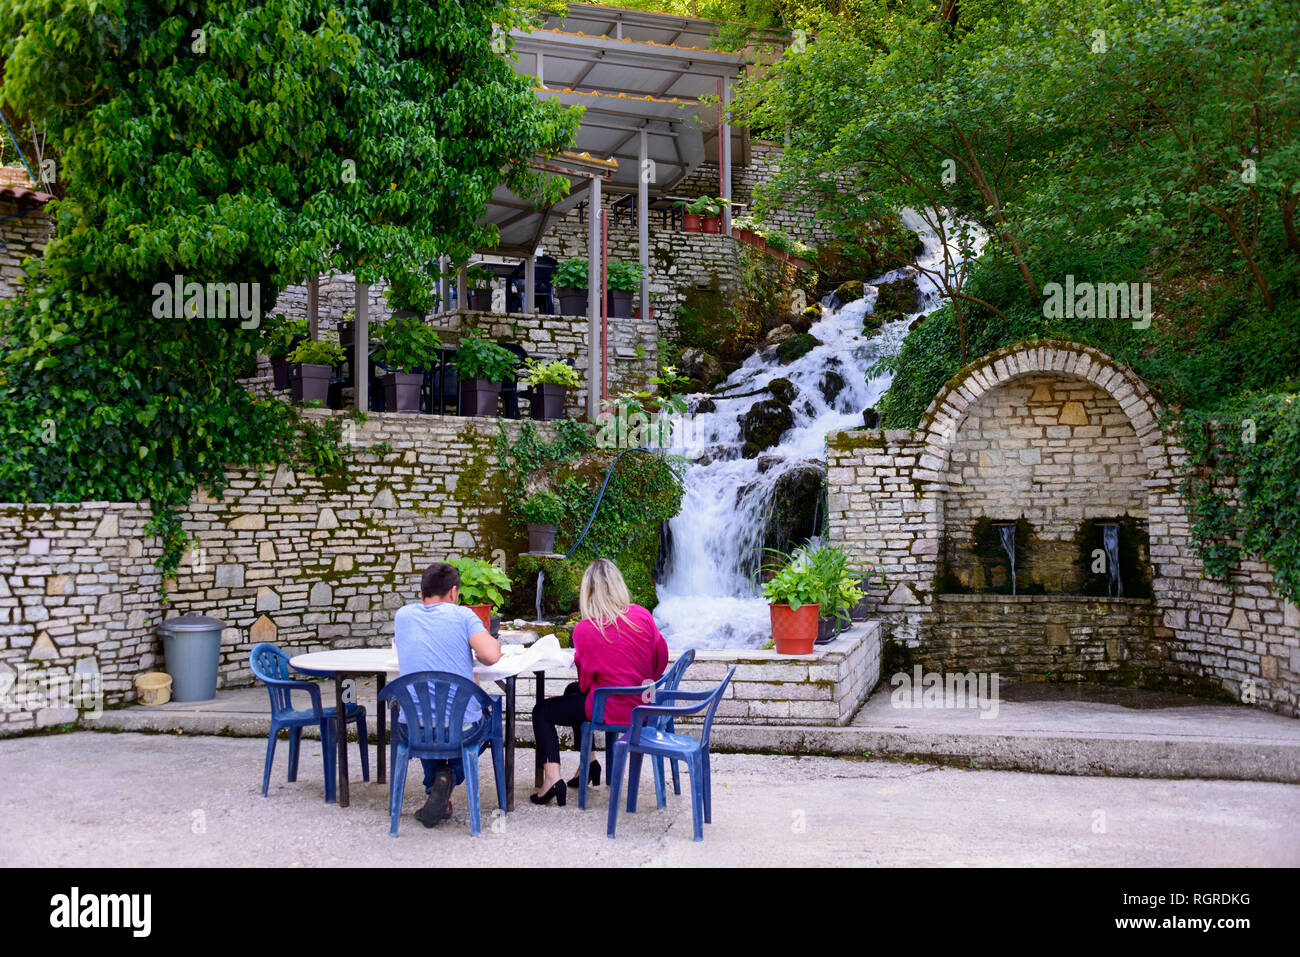 Restaurant at source, cold water nature monument, i Ftothe, Albania Stock Photo